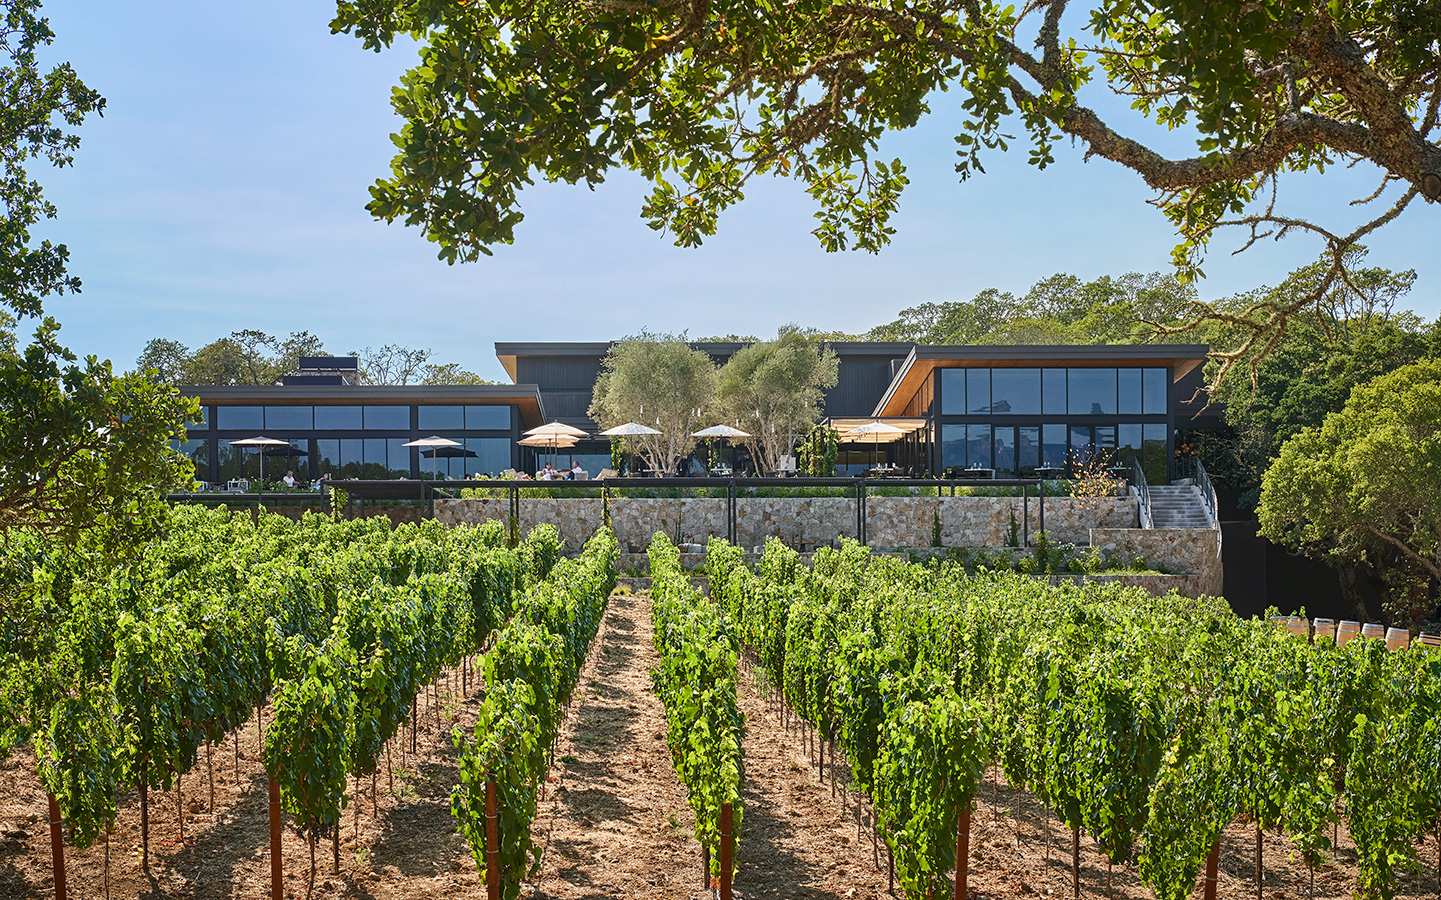 THE TOP 15 Things To Do in Napa & Sonoma